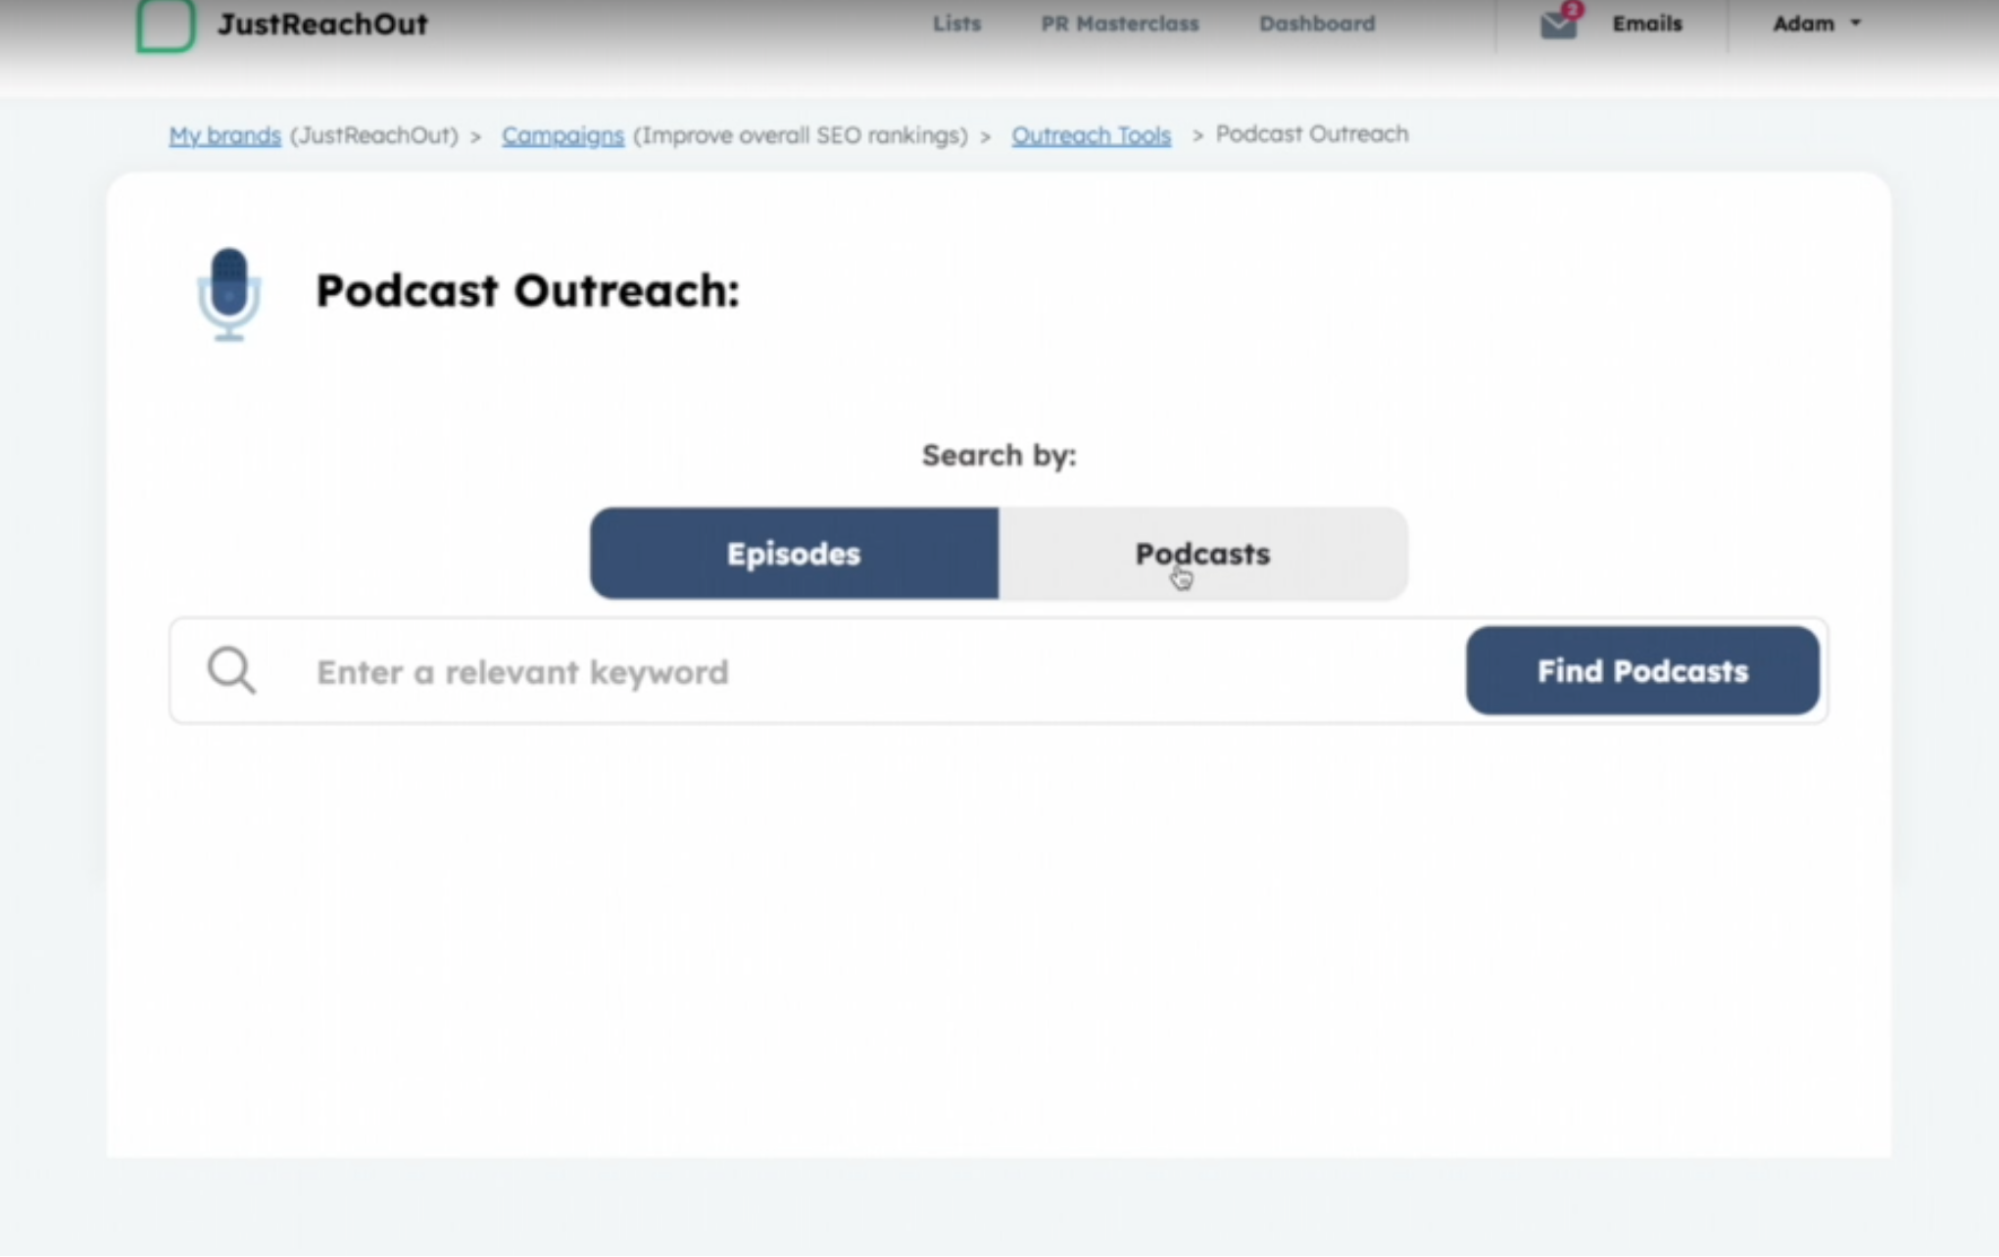 Podcast outreach with JustReachOut